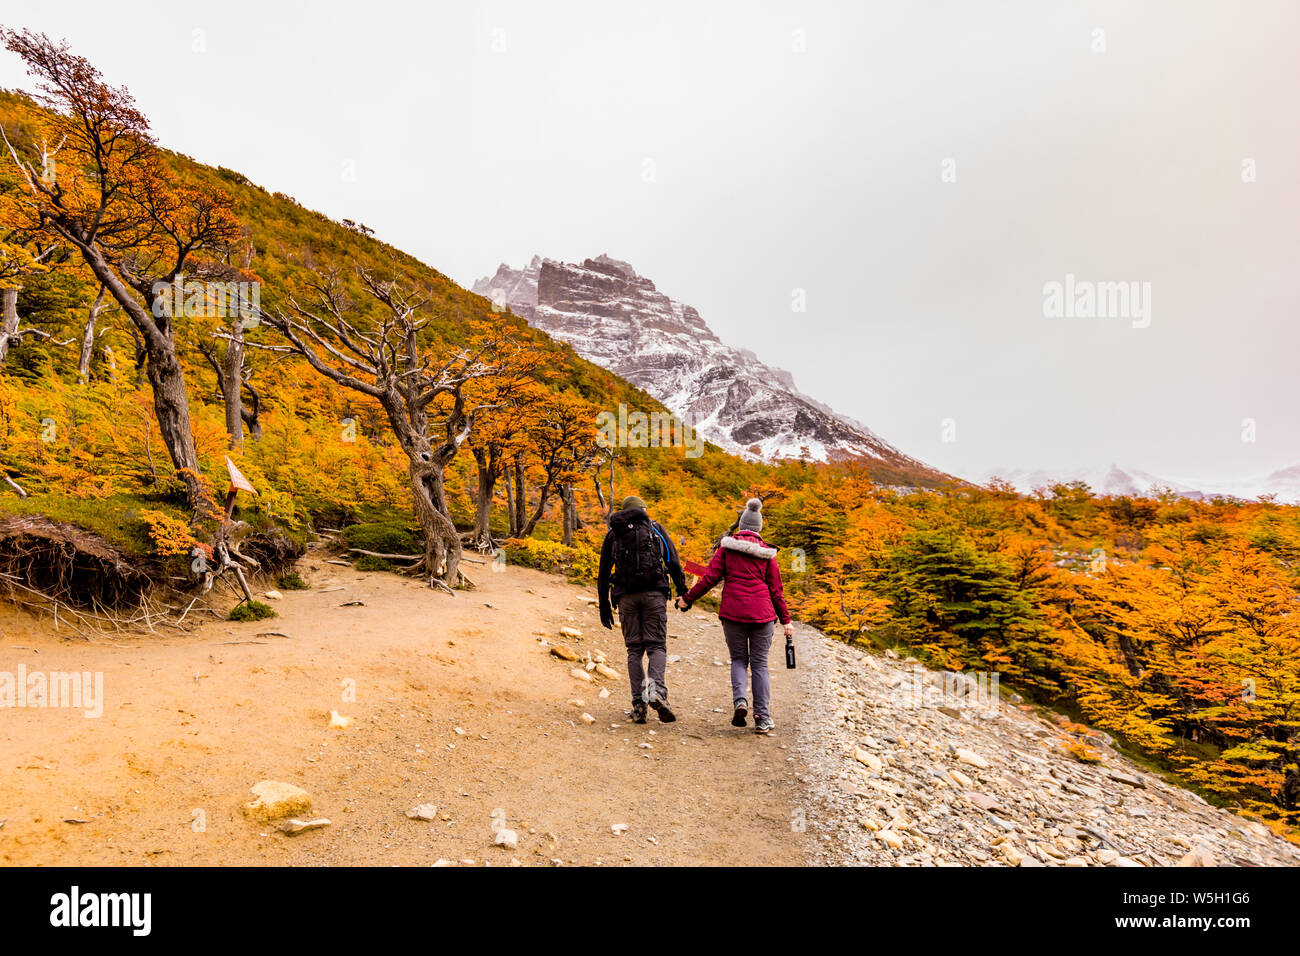 Enjoying the peaceful and beautiful scenery of Torres del Paine National Park, Patagonia, Chile, South America Stock Photo